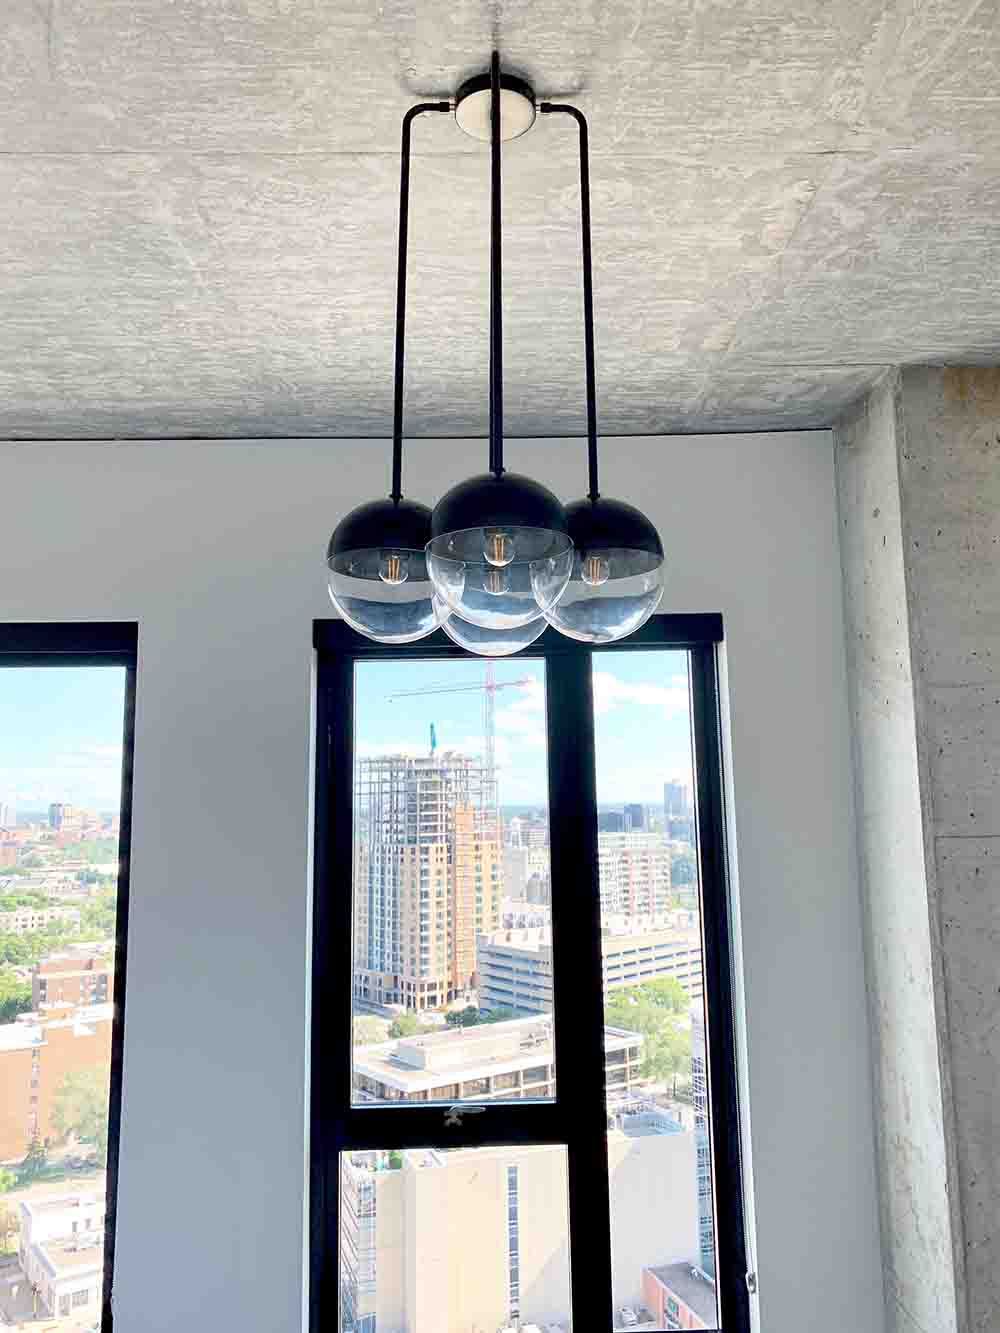 Nickel and black color Reign chandelier by Dutton Brown